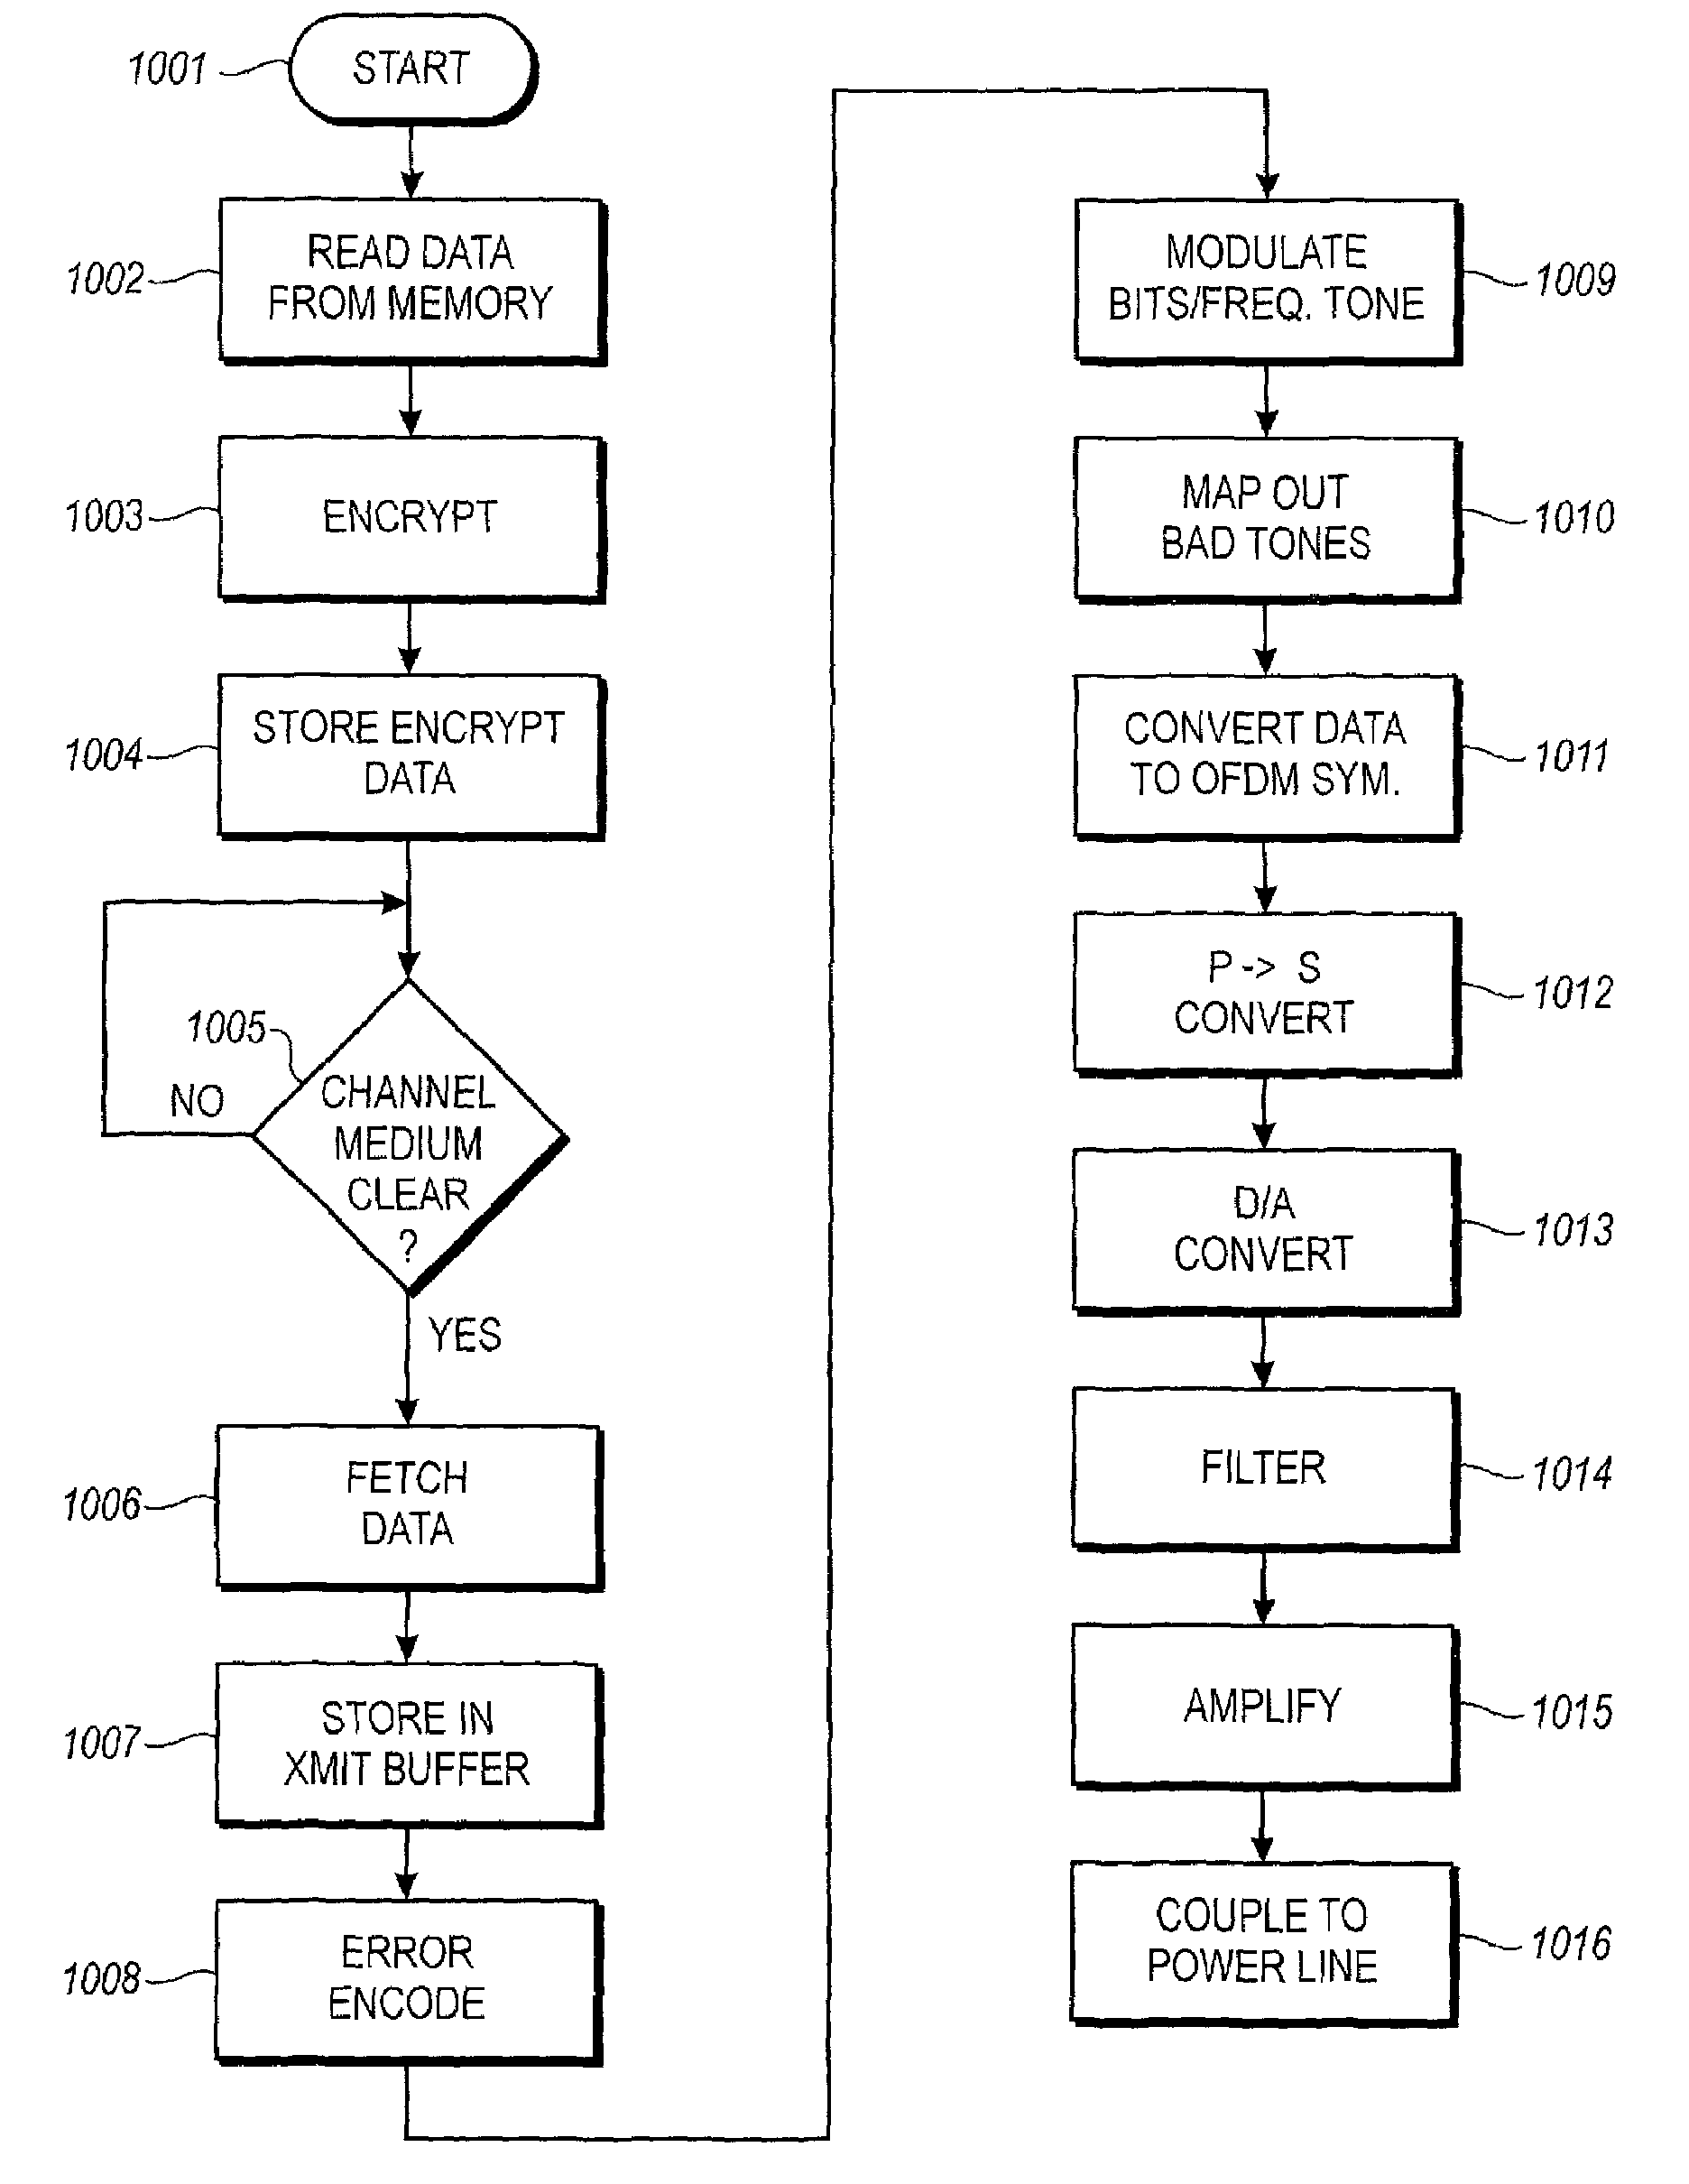 Method and system for adapting a telephone line modem for use on the power line